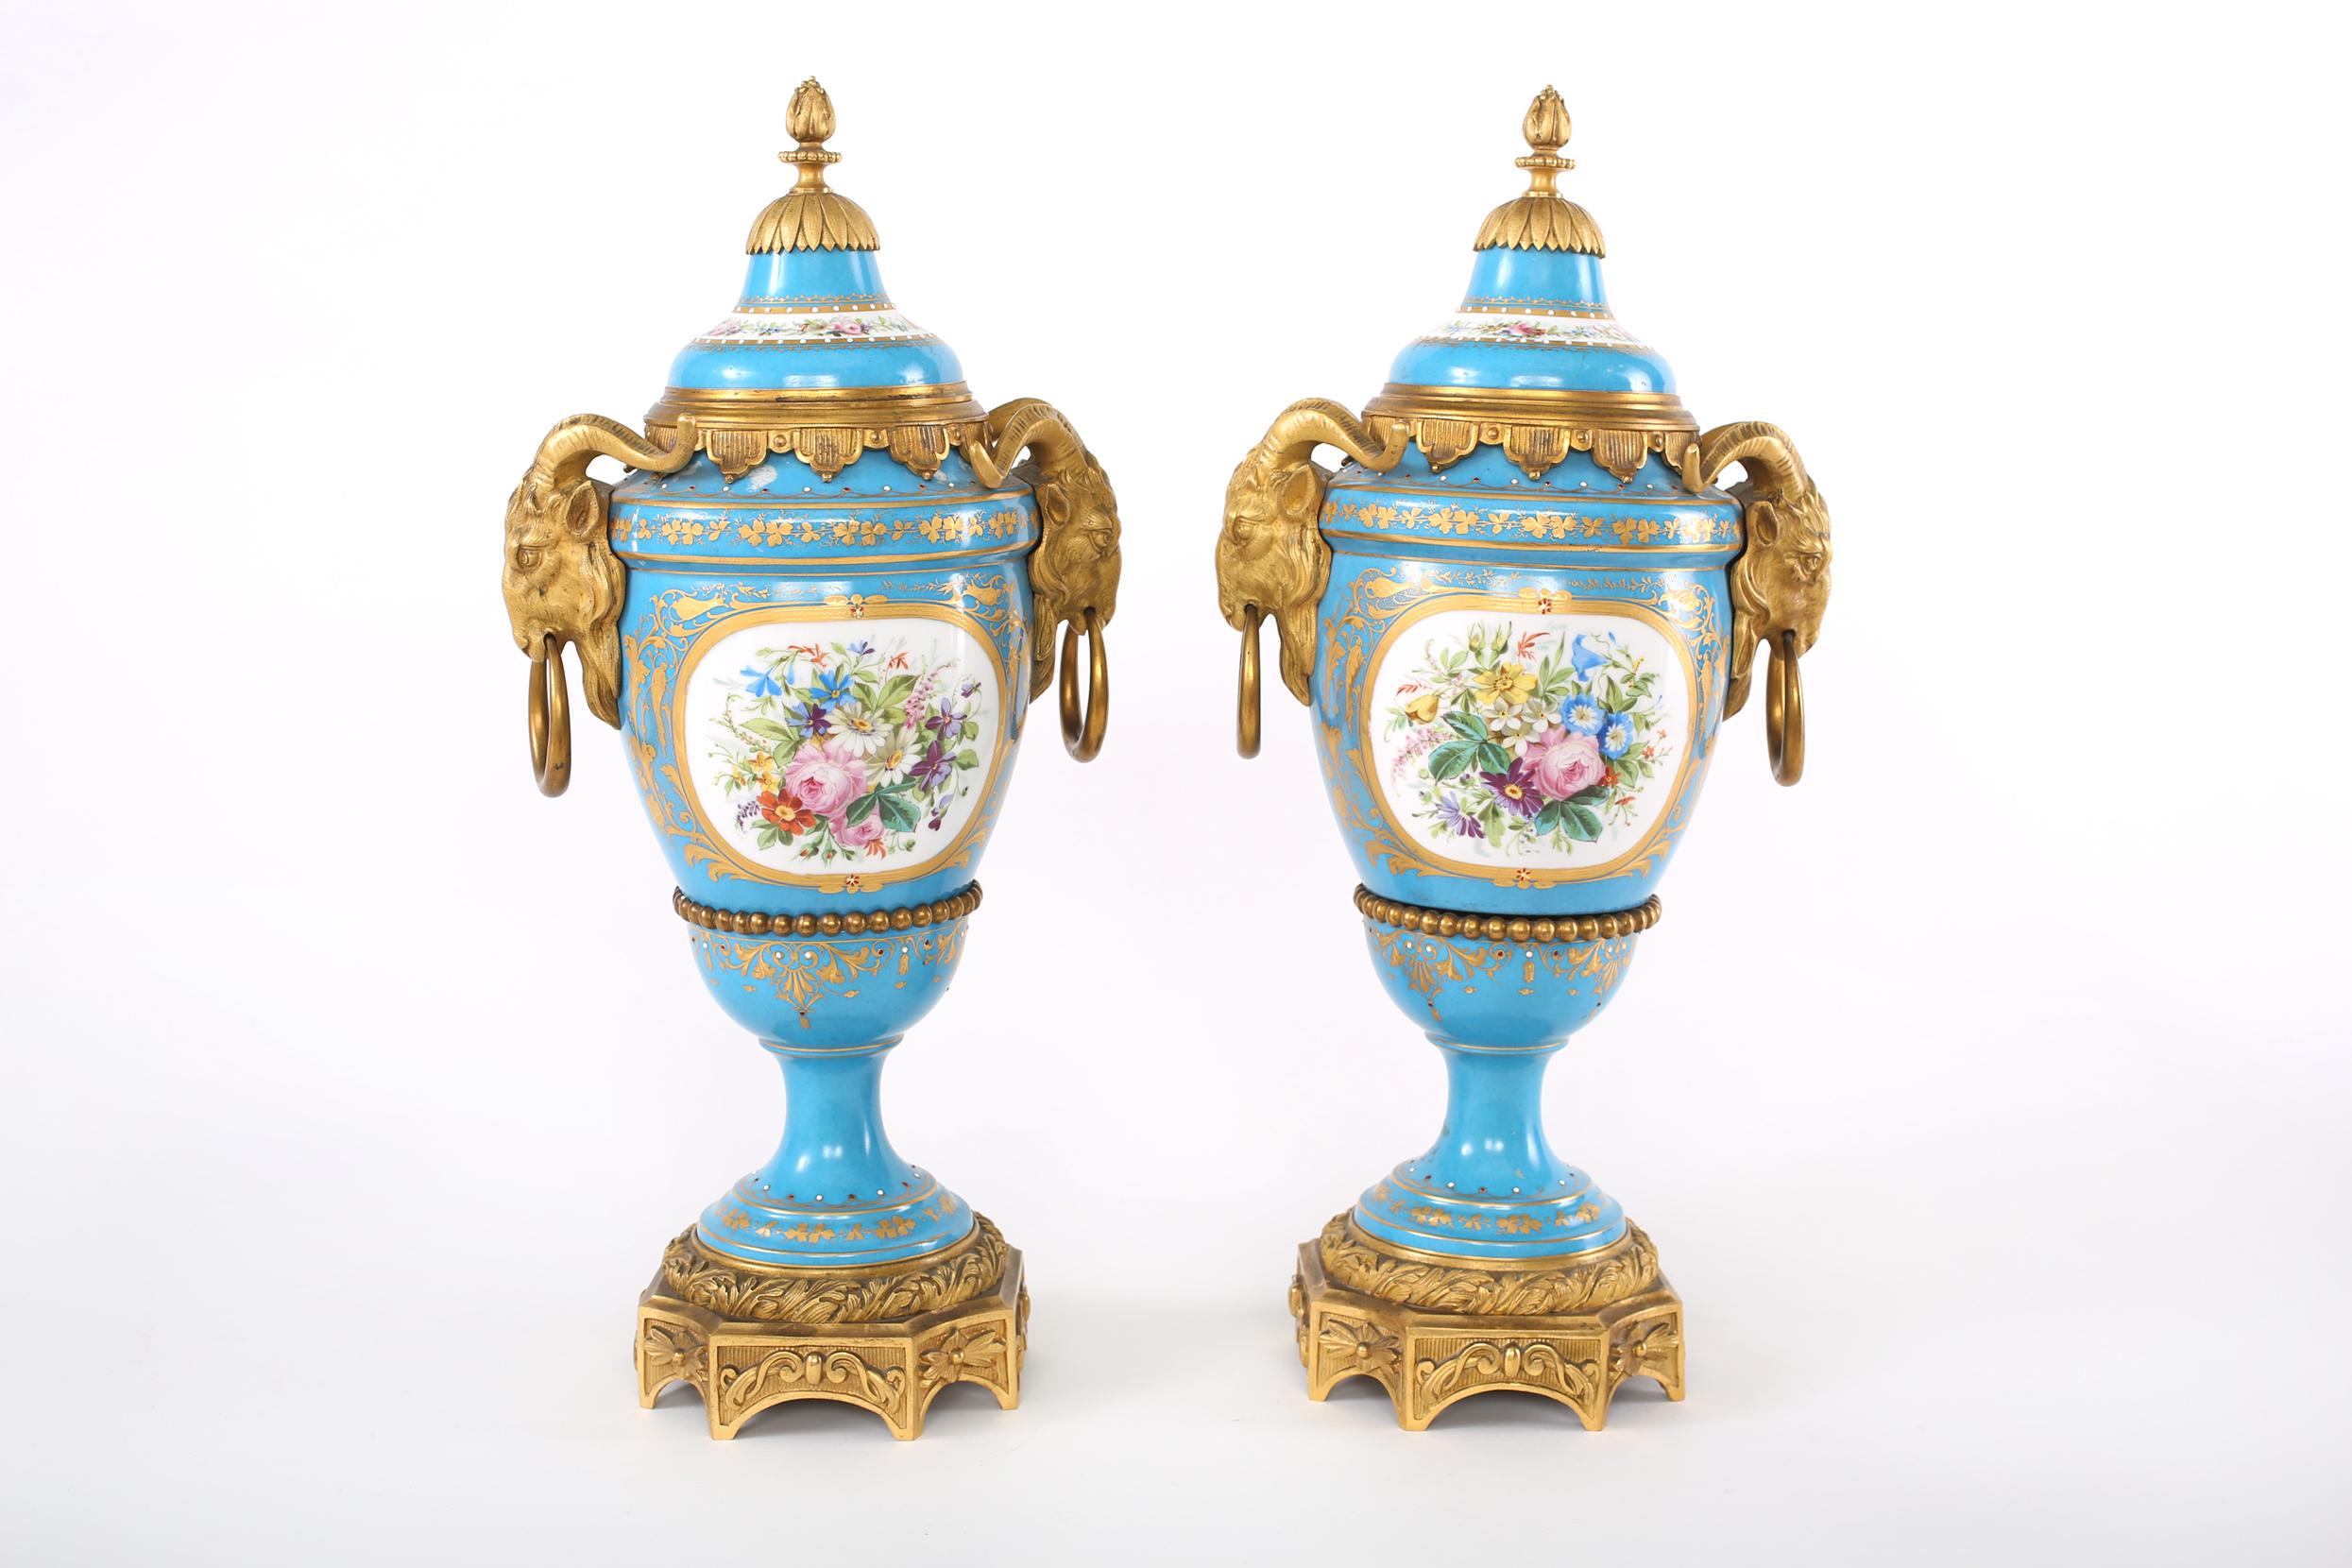 Gilt 19th Century Bronze Mounted / Porcelain Covered Urns For Sale